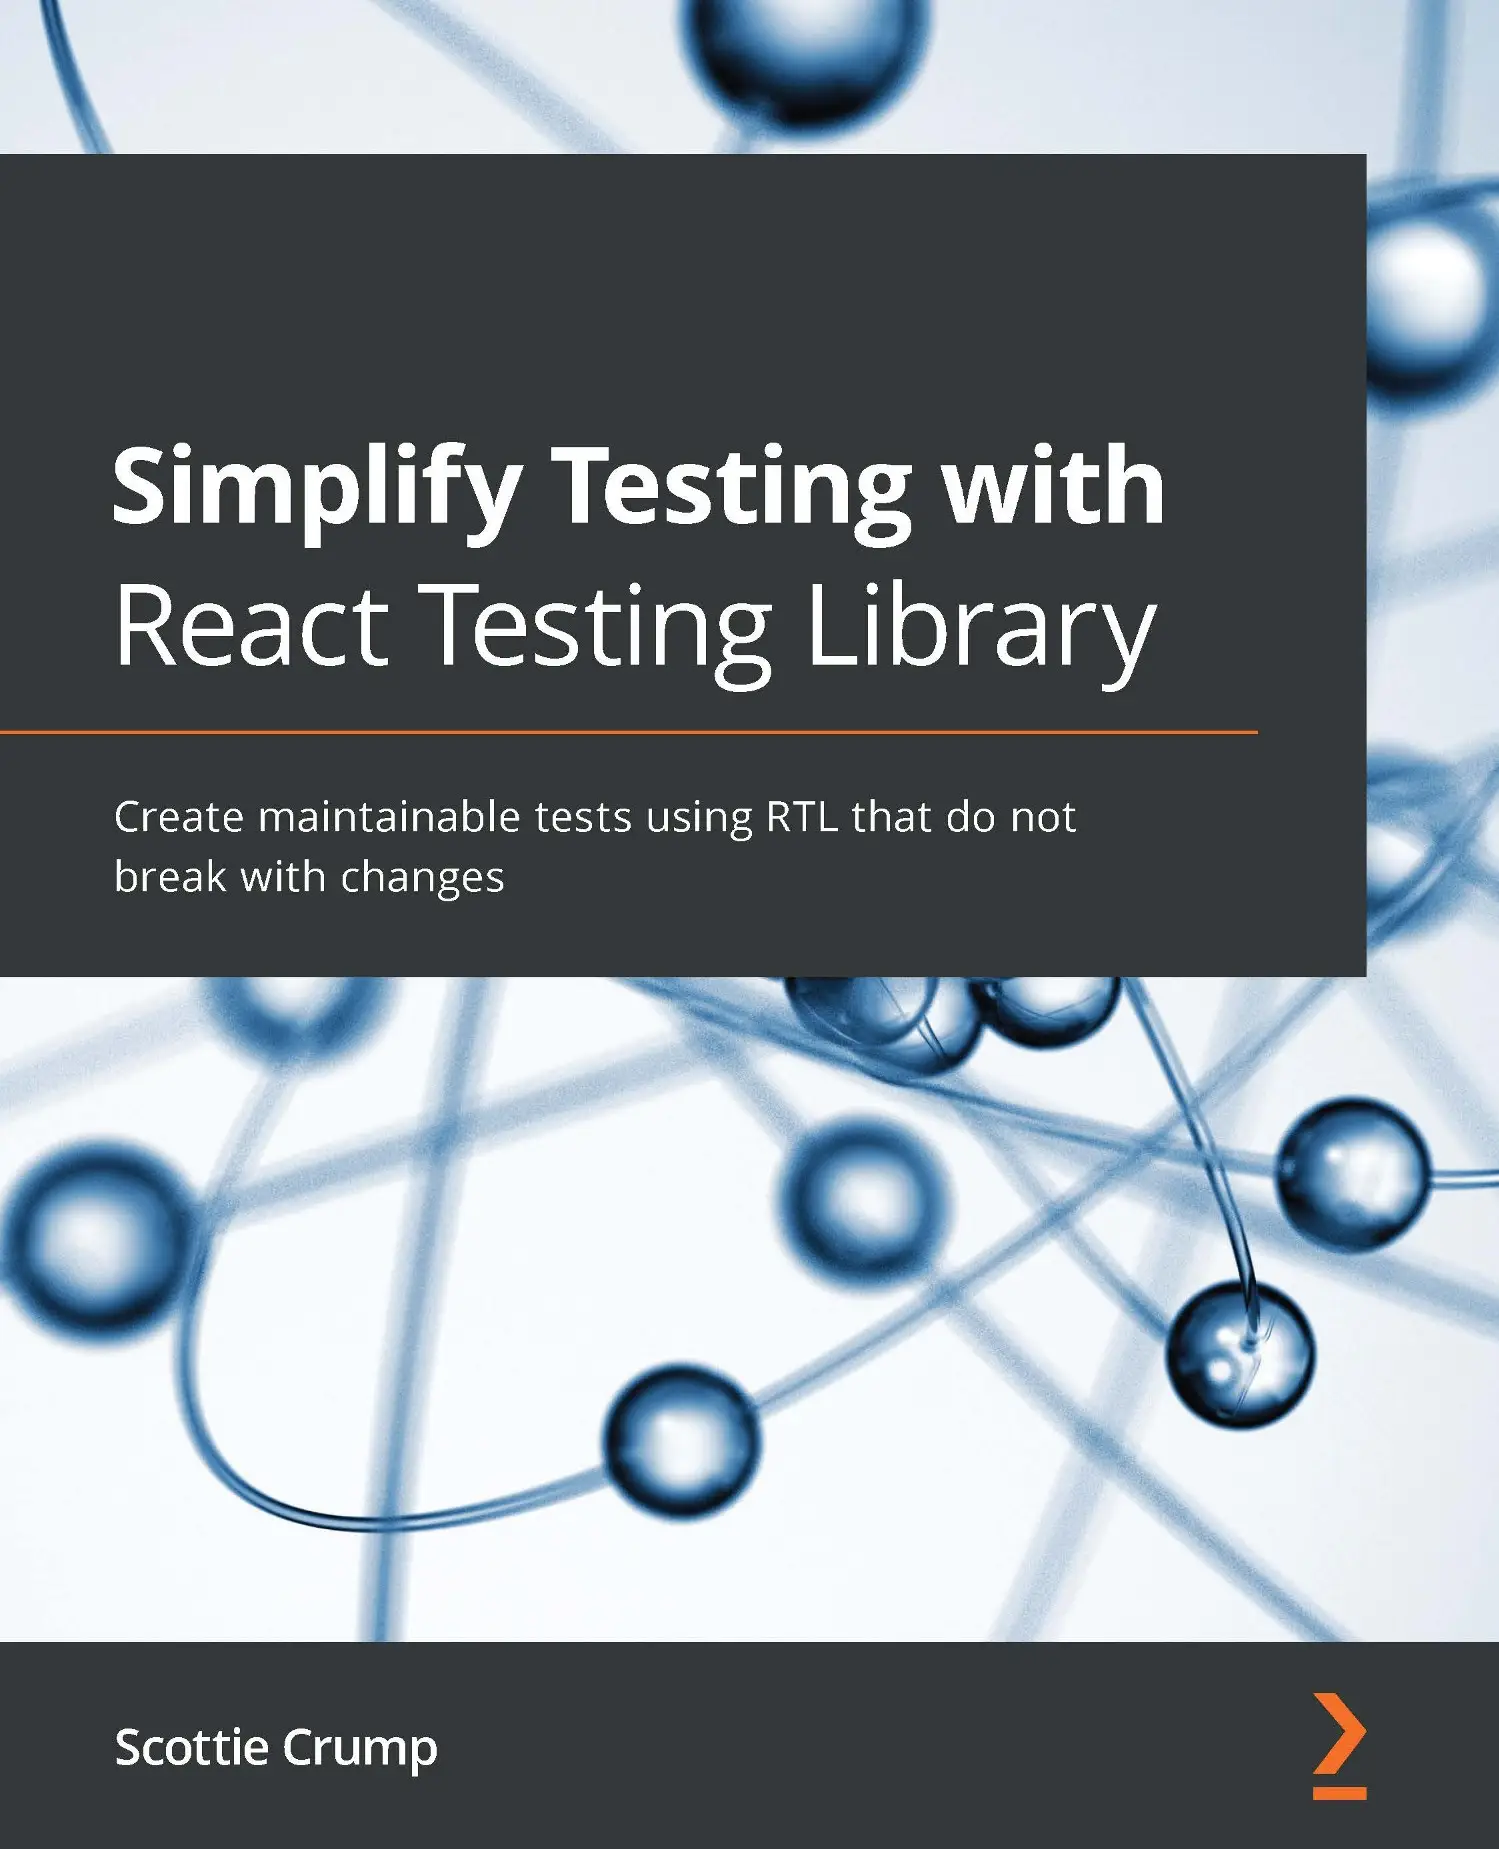 simplify-testing-with-react-testing-library-avaxhome